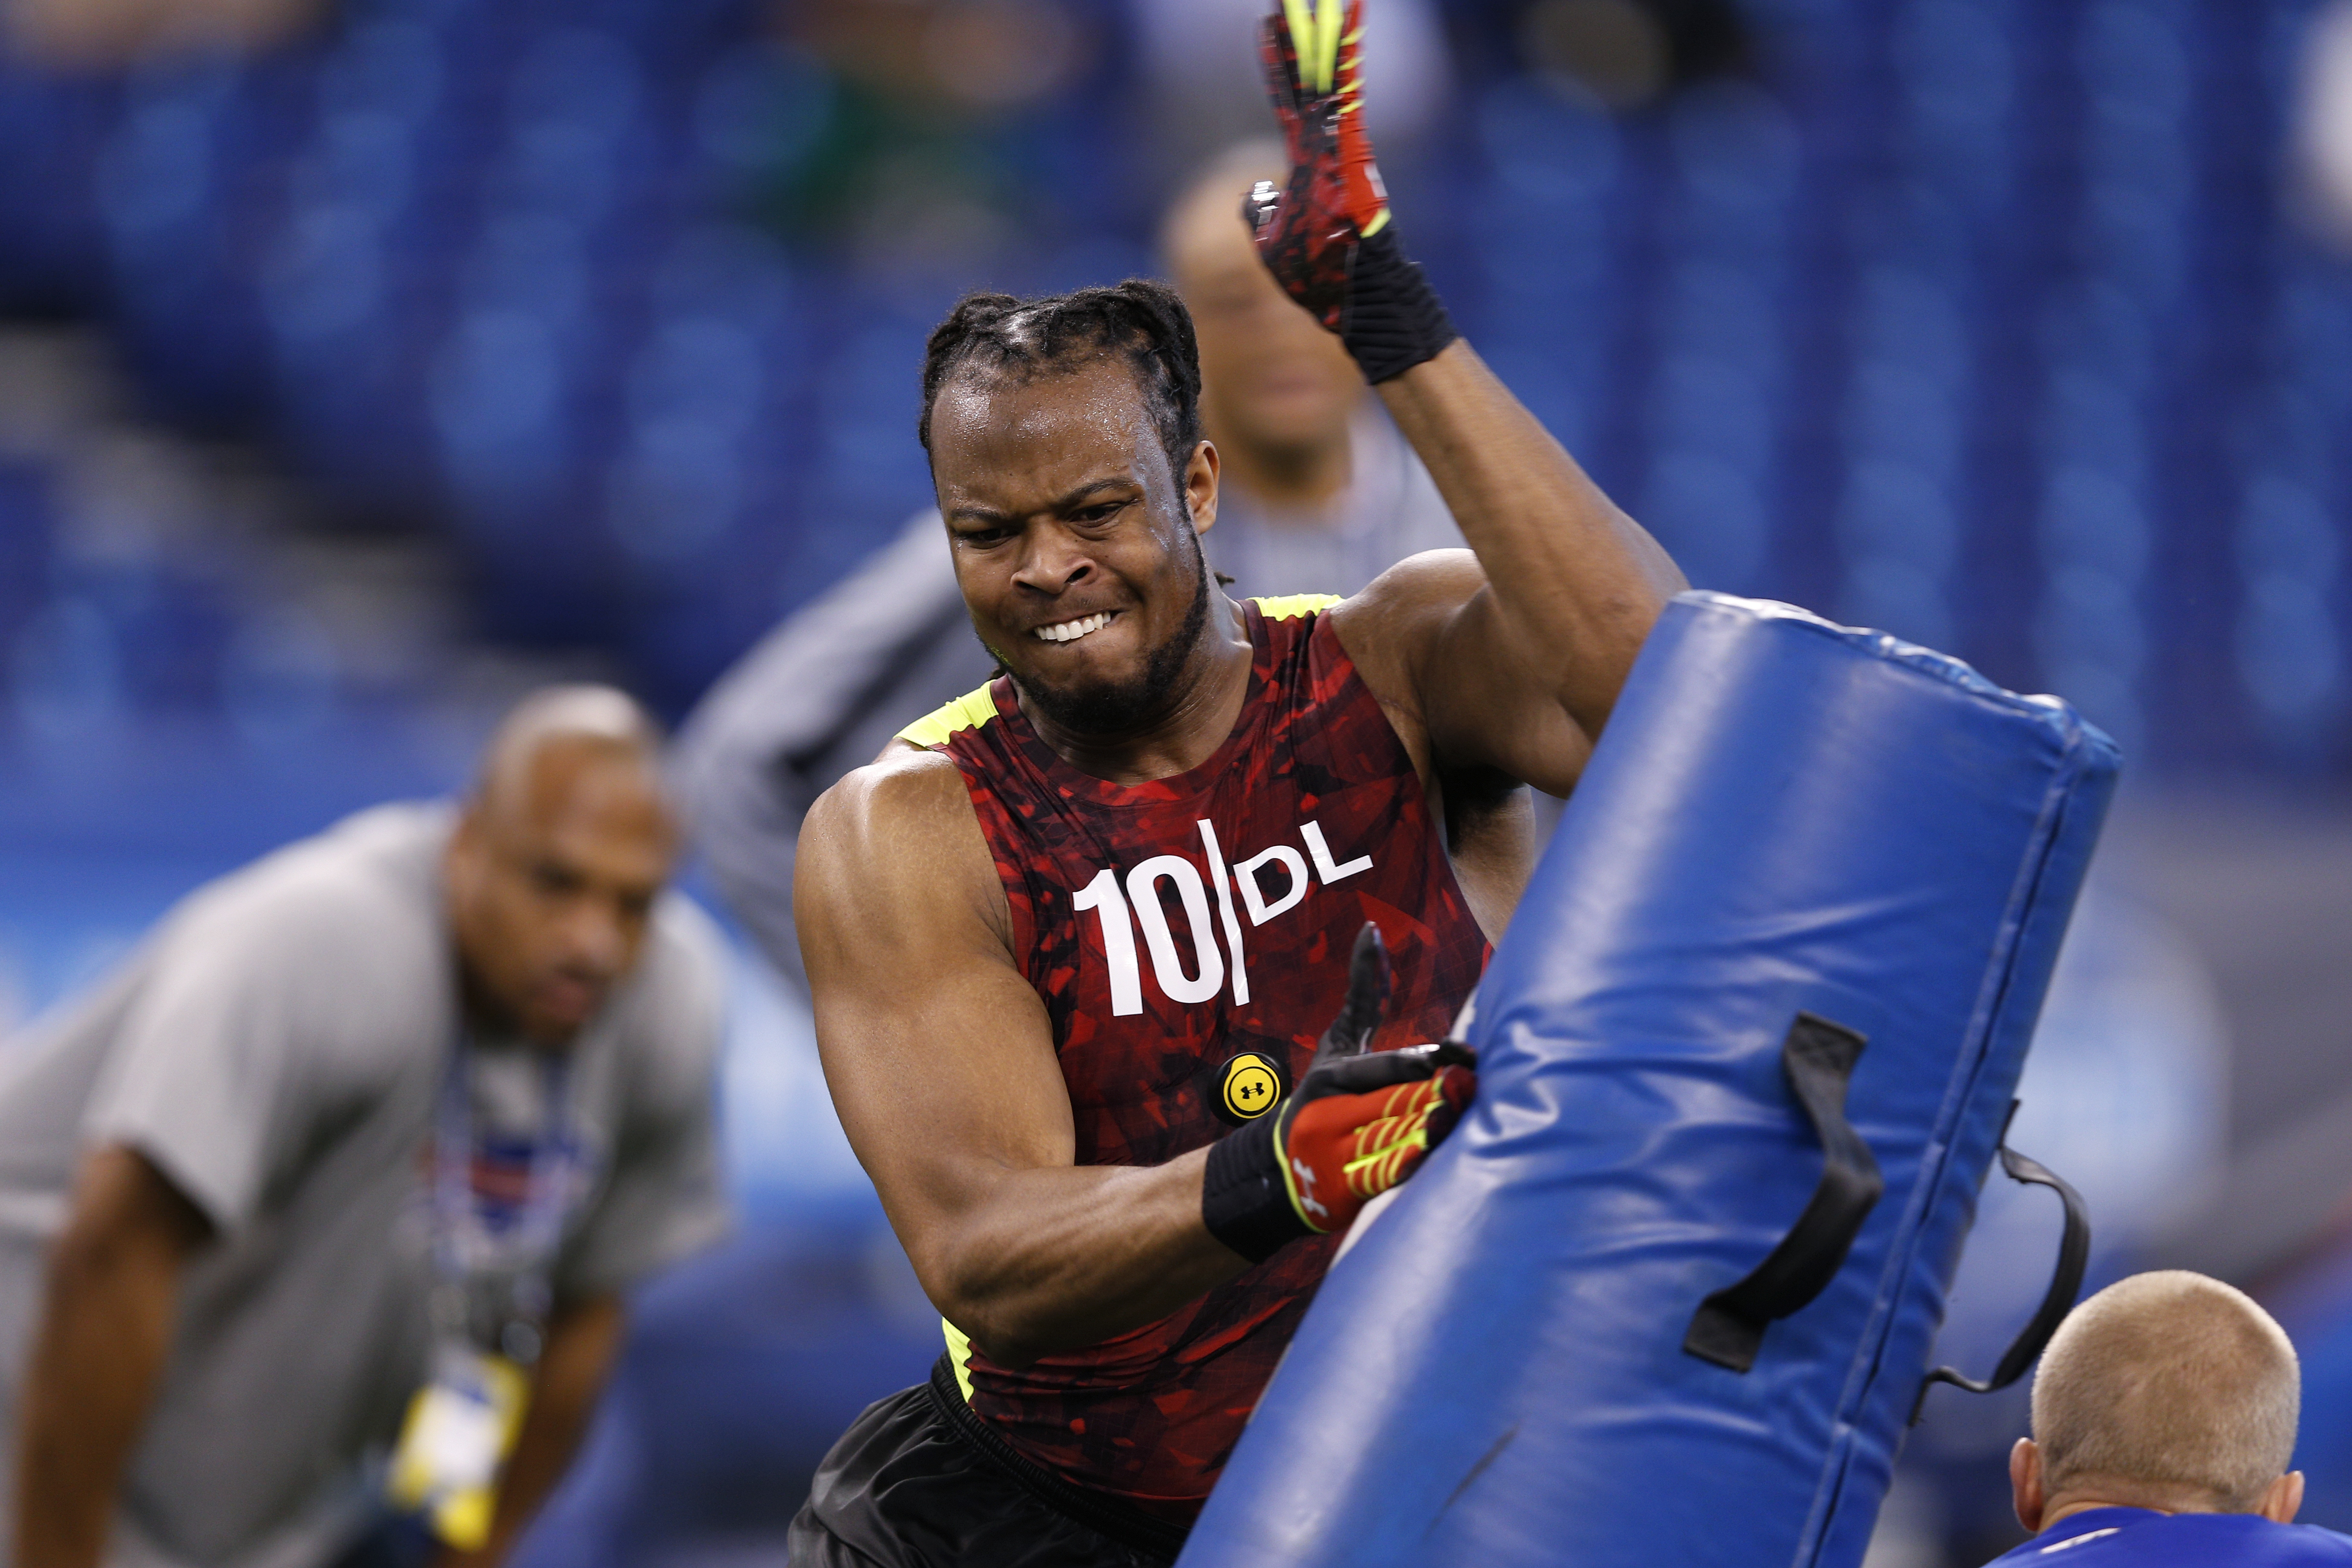 INDIANAPOLIS, IN - FEBRUARY 25: Lavar Edwards of LSU works out during the 2013 NFL Combine at Lucas Oil Stadium on February 25, 2013 in Indianapolis, Indiana.